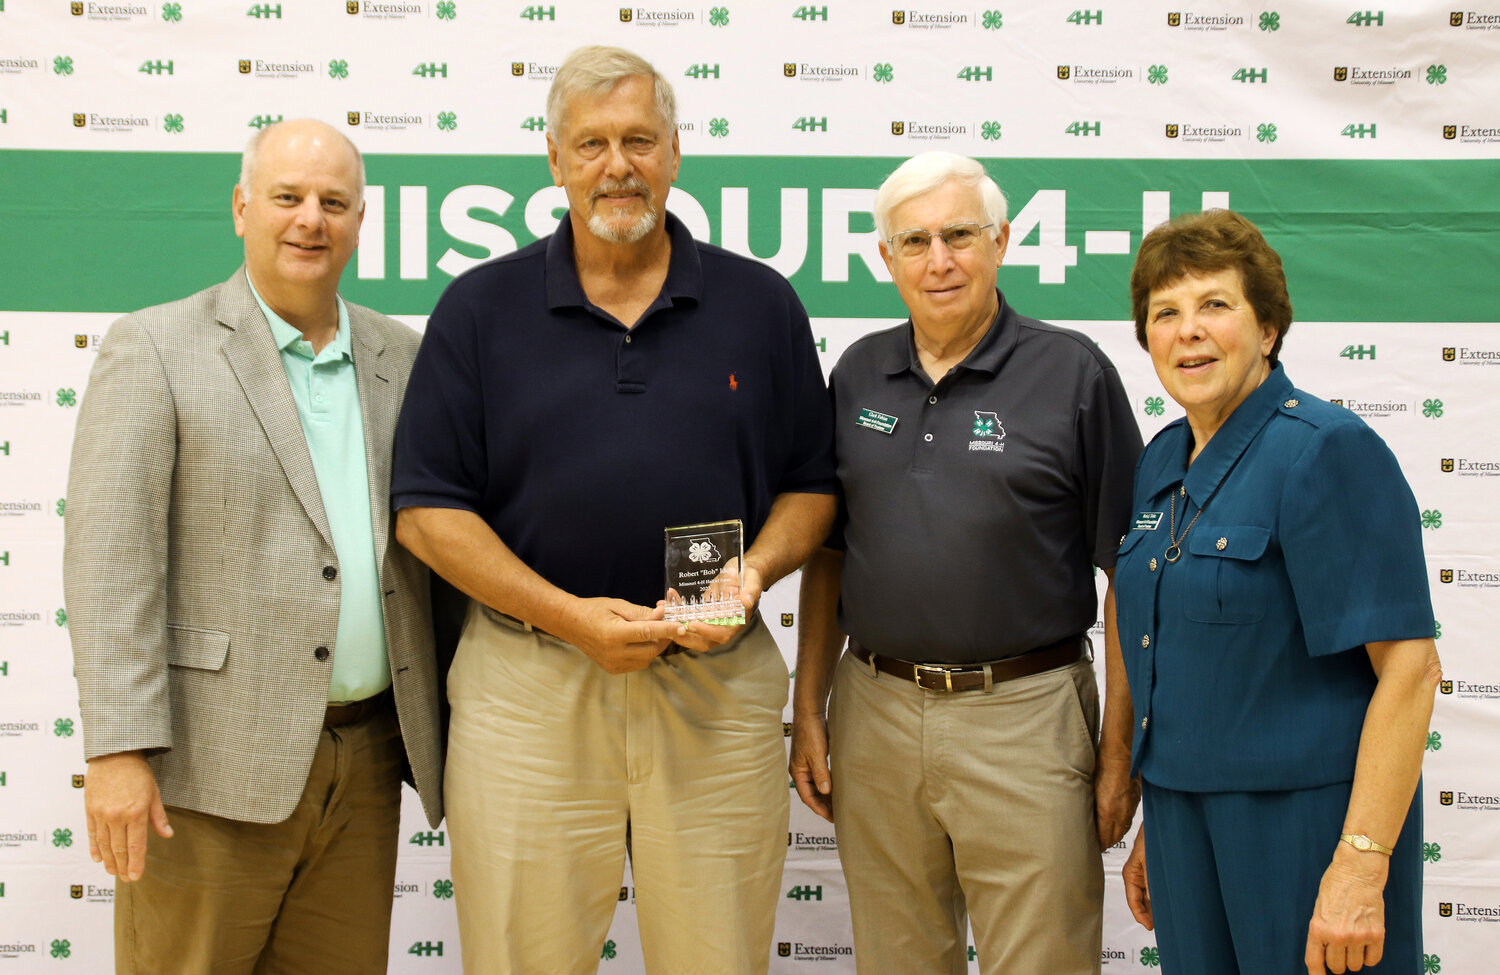 Missouri 4-h Hall of Fame inductee Bob “Chuck” Idel (second from left) is pictured with 4-H Foundation trustees (from left) Earl Niemeyer, Clark Fobian, and Marla Tobin.